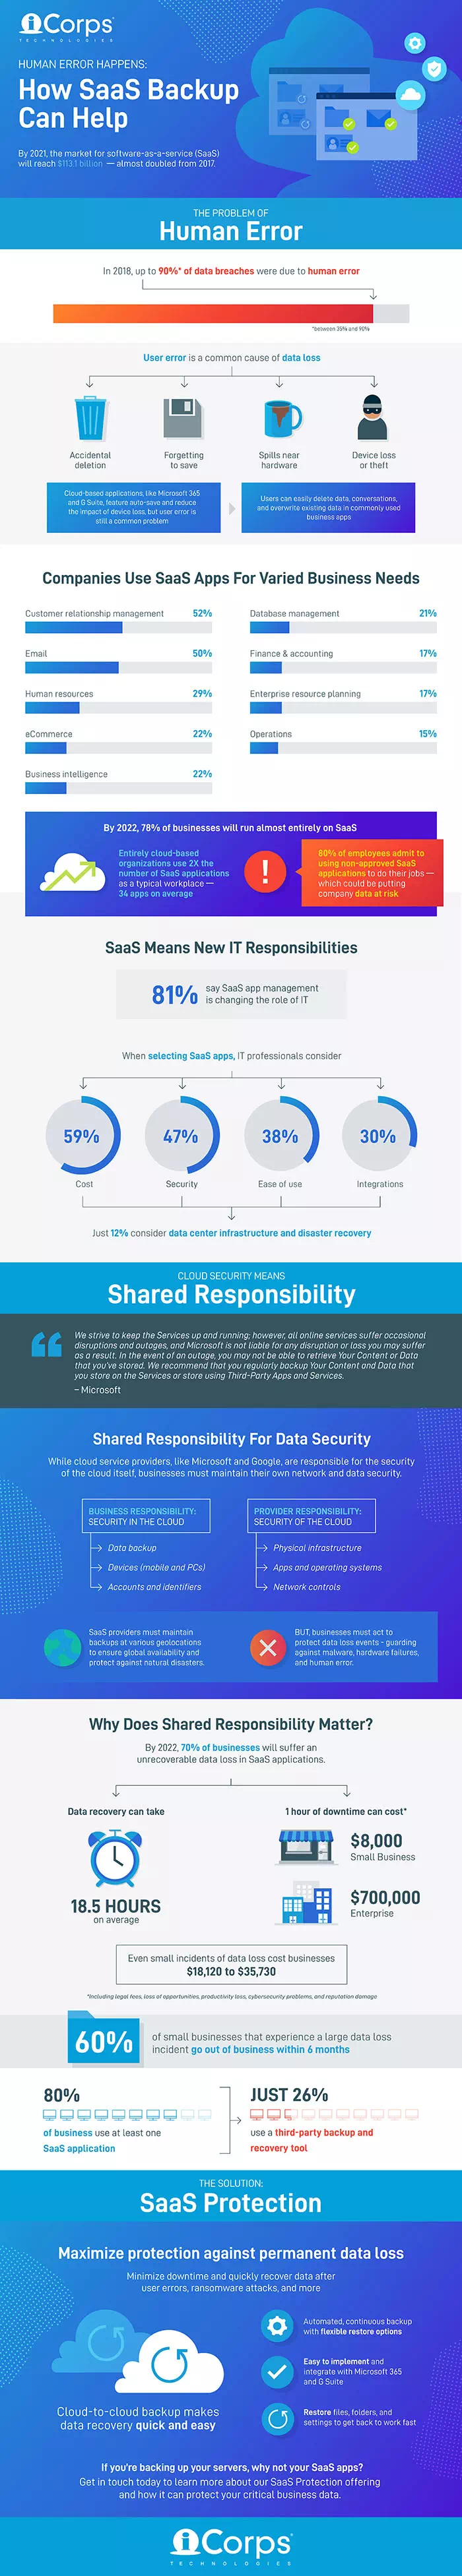 [INFOGRAPHIC] How SaaS Backup Can Help with Human Error